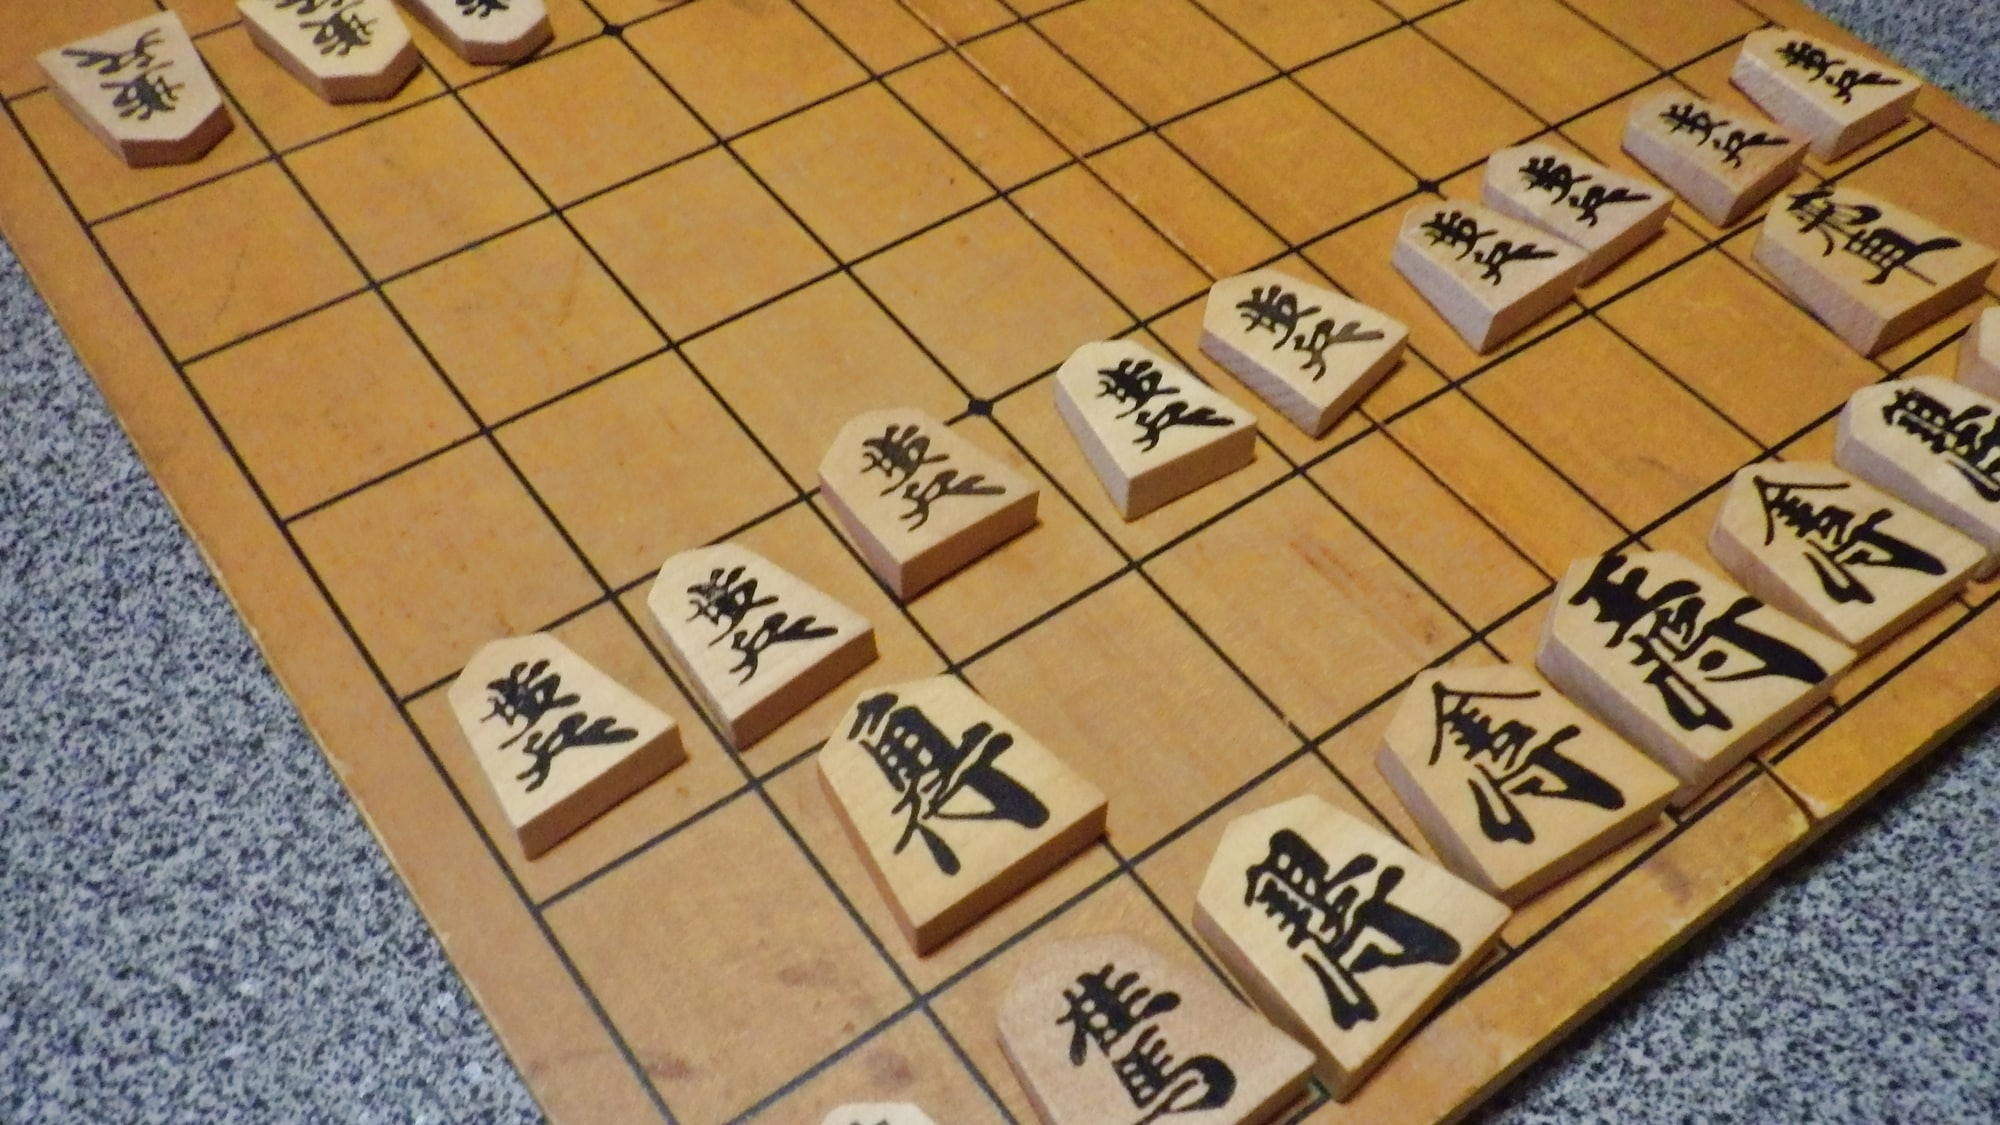 * [Room] We have shogi and Othello that you can enjoy during your stay.